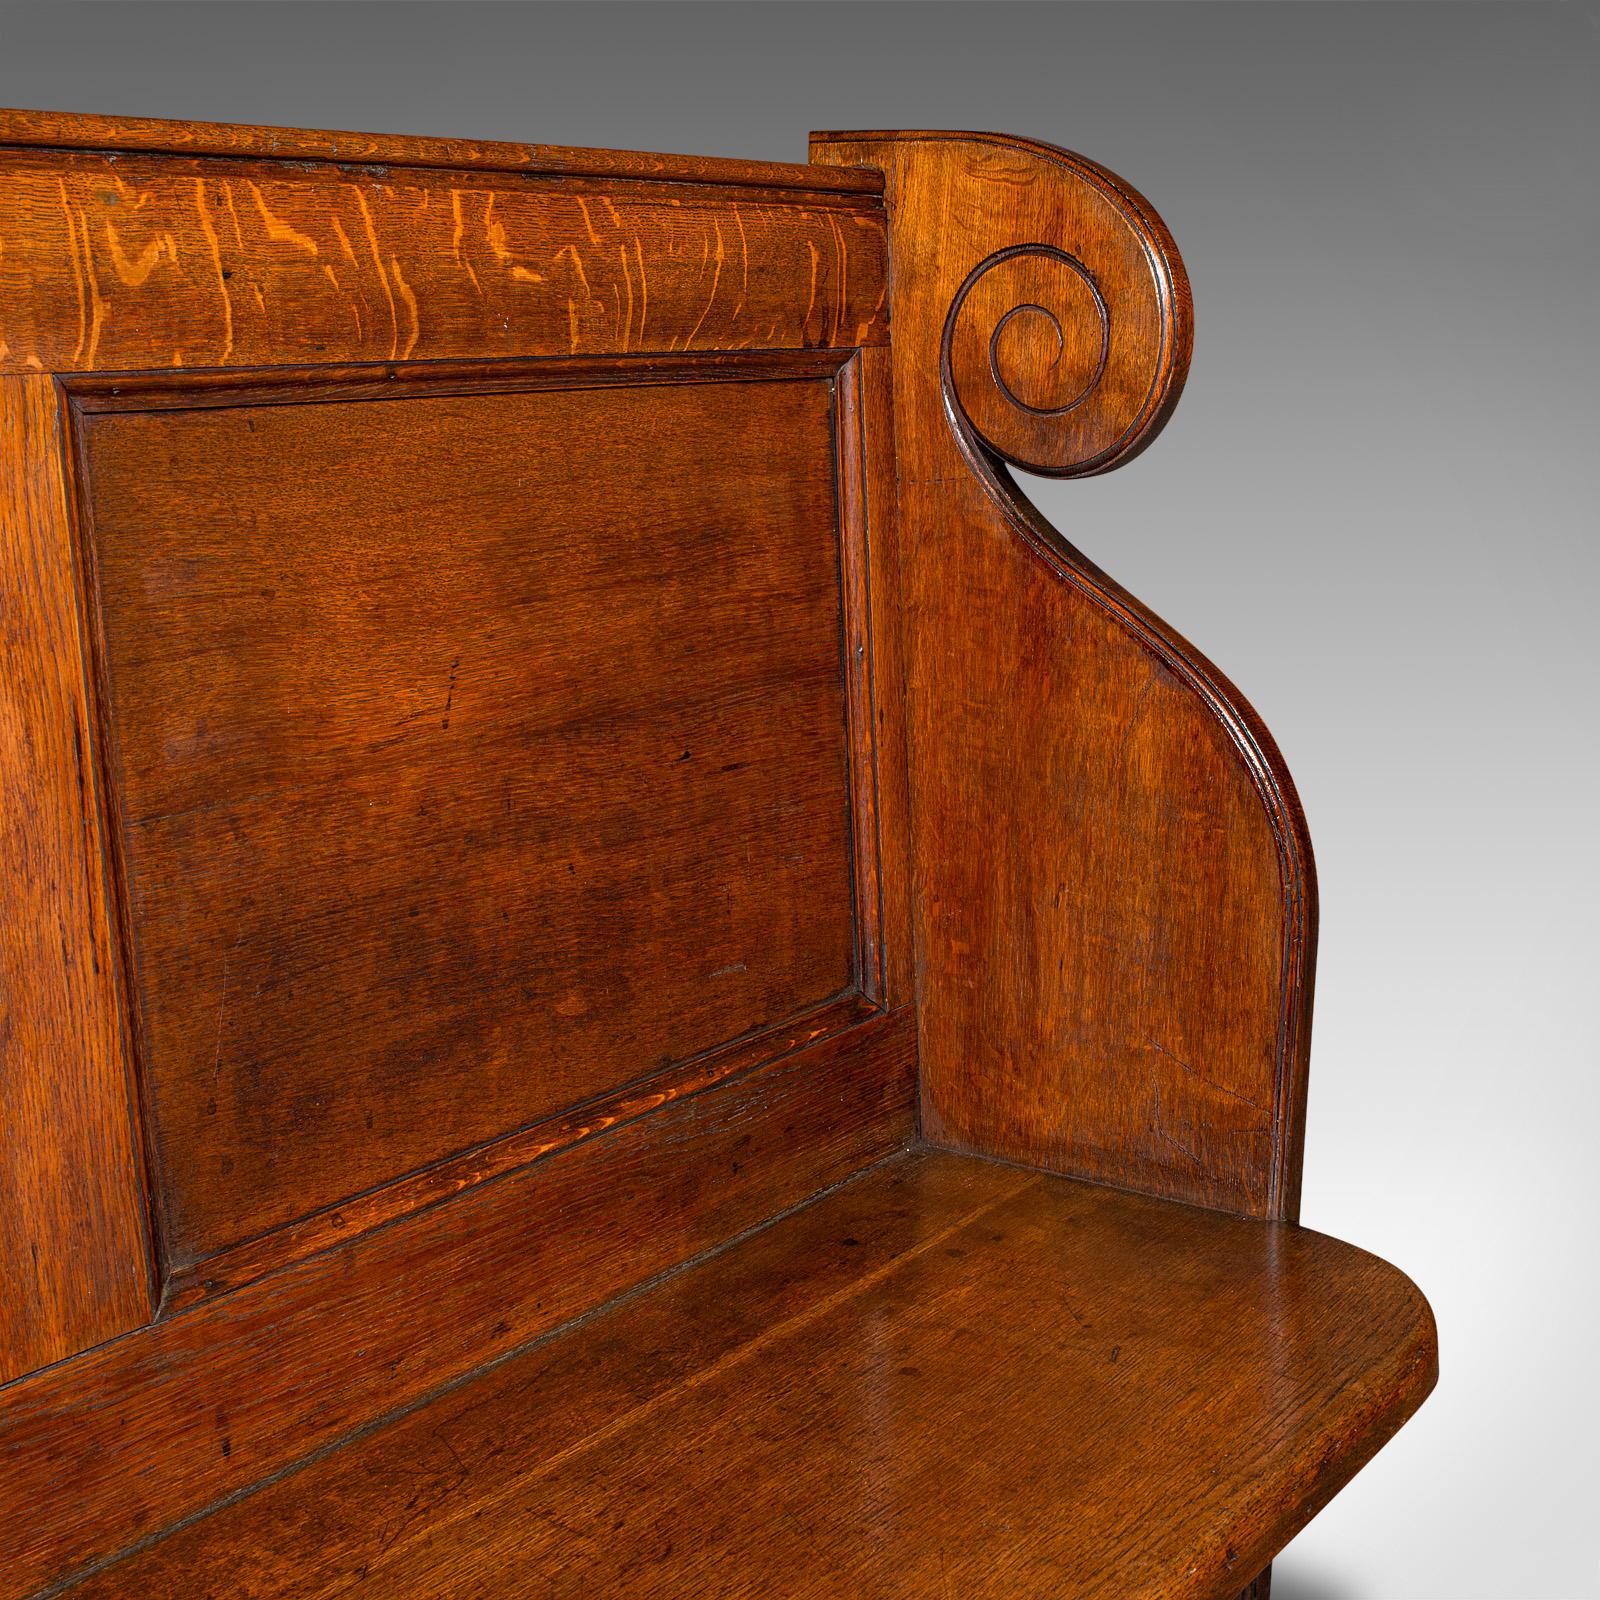 Antique Panelled Church Pew, English, Oak Bench, Ecclesiastic, Victorian, C.1850 For Sale 3